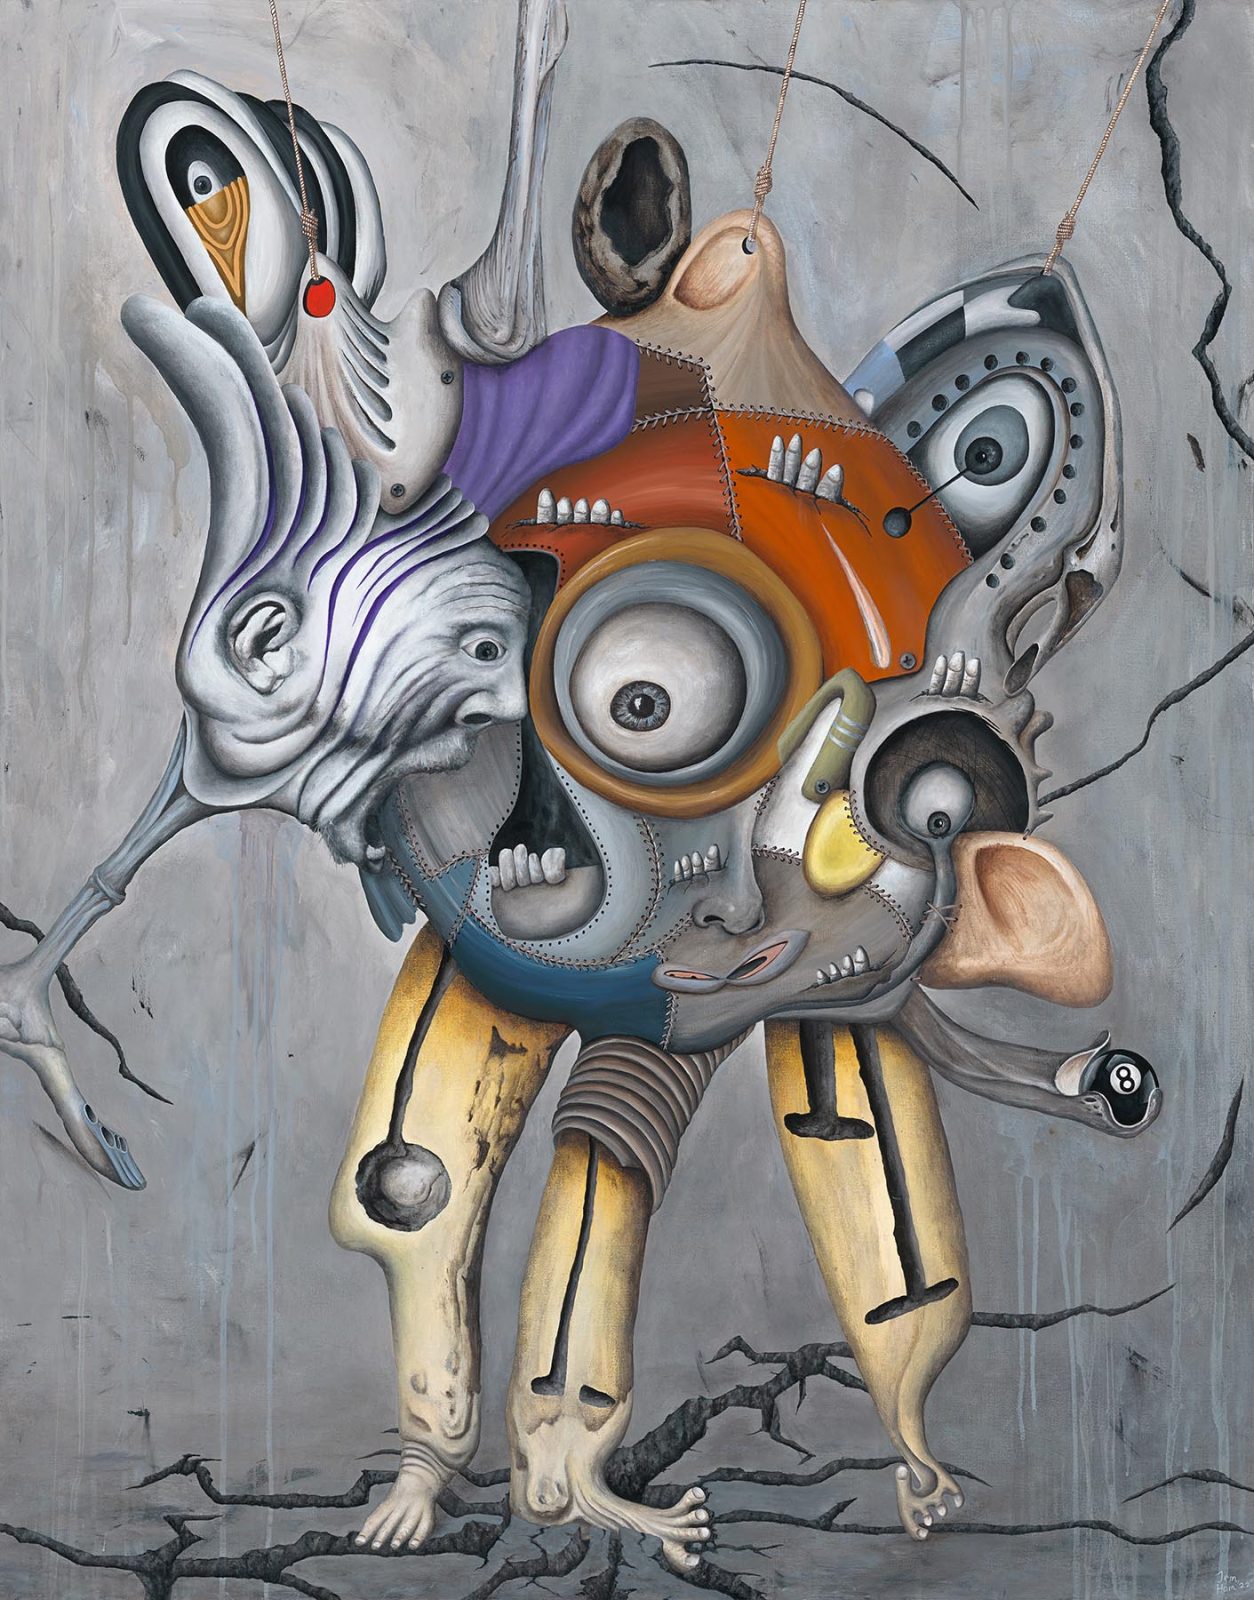 Surreal painting of face with large eyeball, screaming head and fingers sticking through cracks